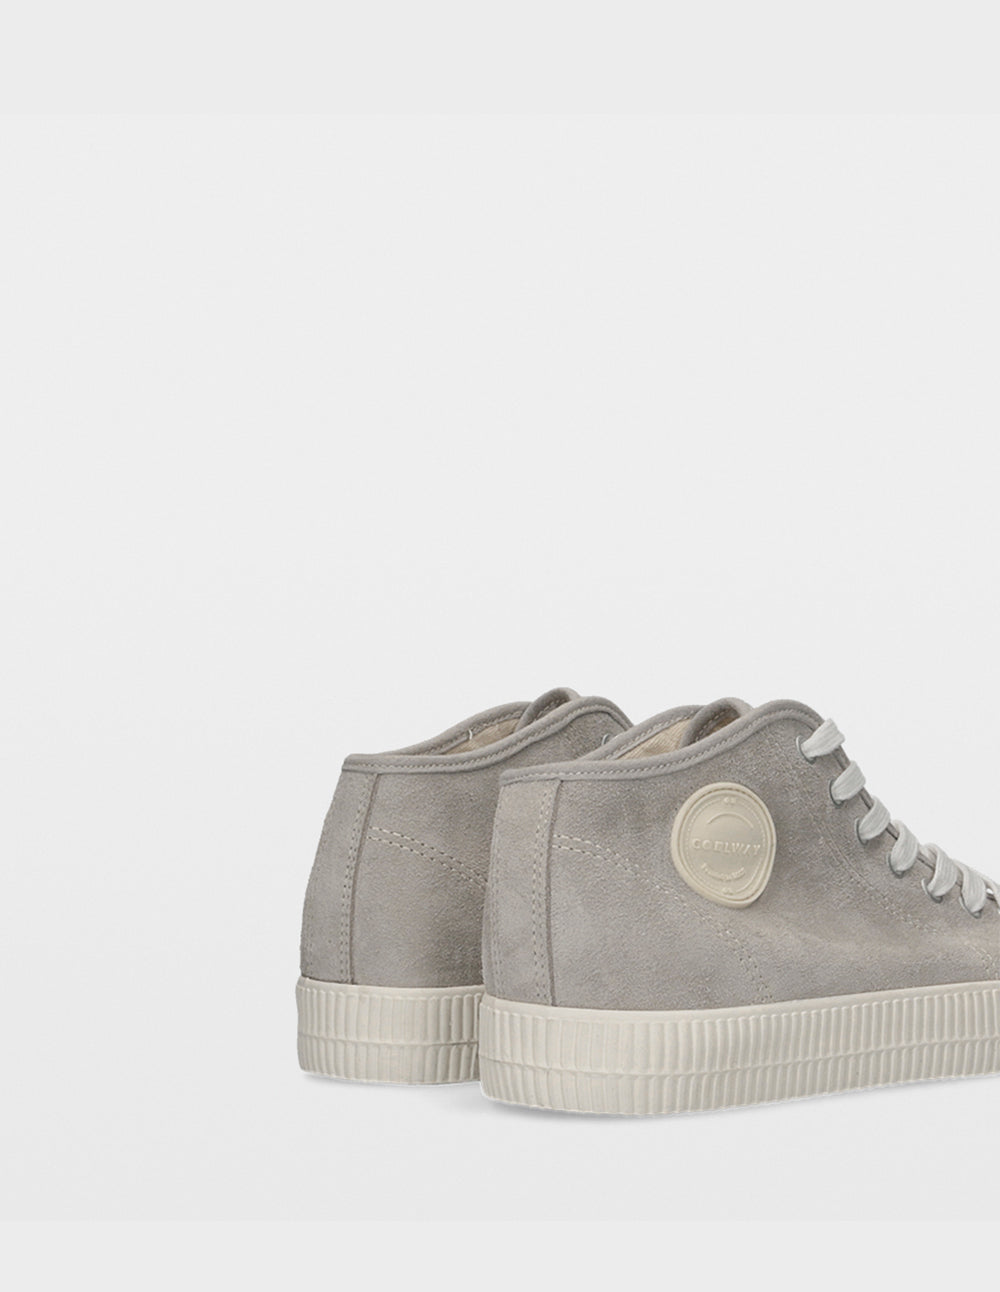 NOVABOOT GREY LEATHER MUJER